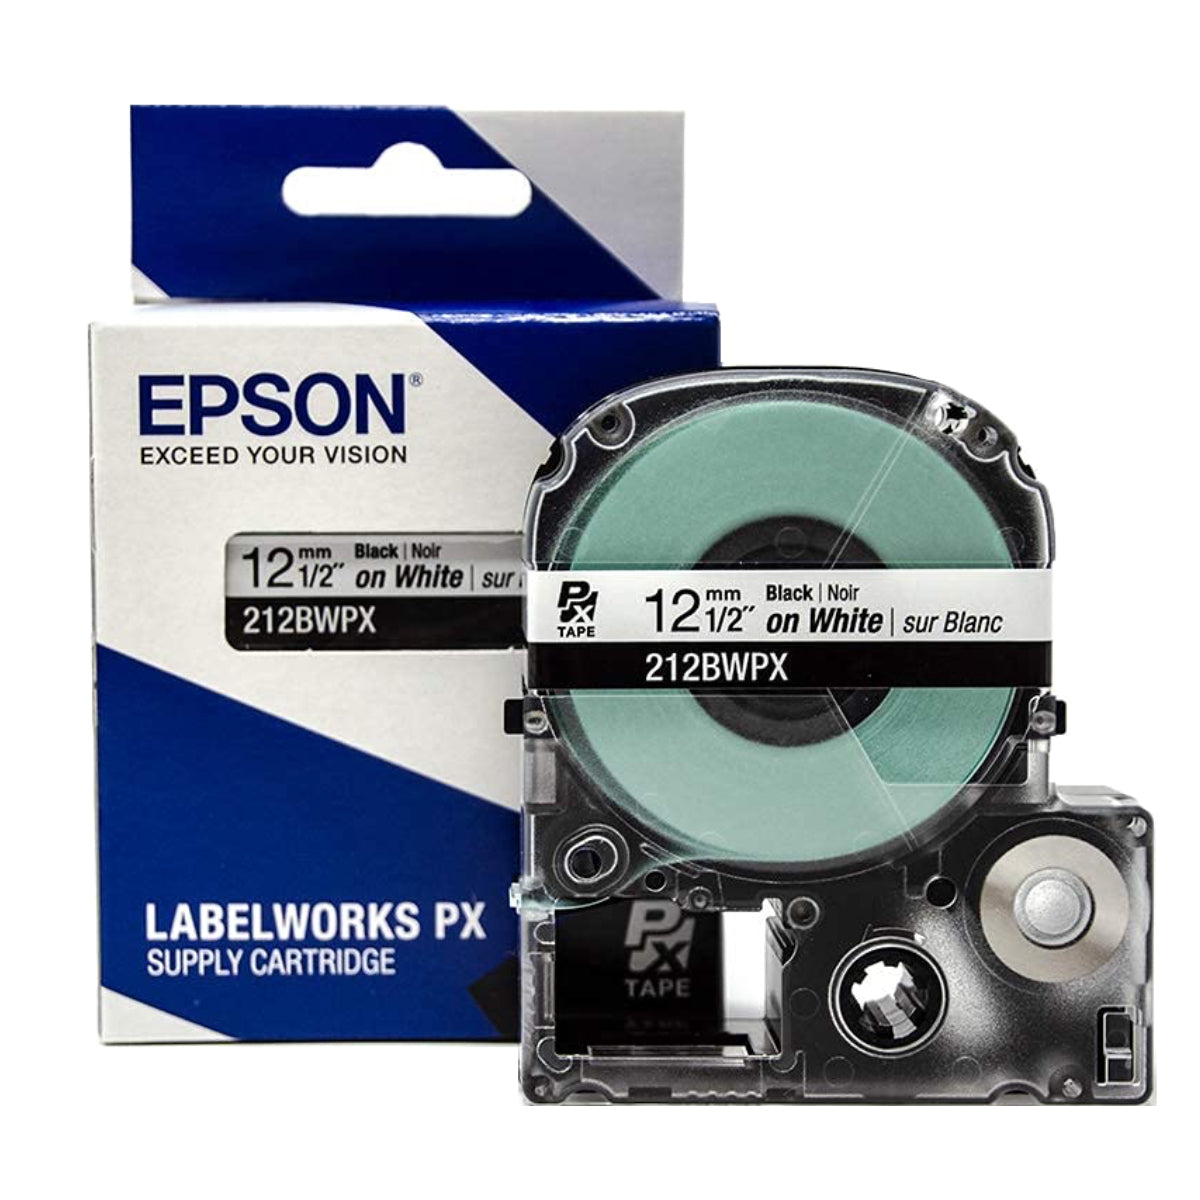 Epson LABELWORKS PX 12mm 212BWPX Tape, Black on White